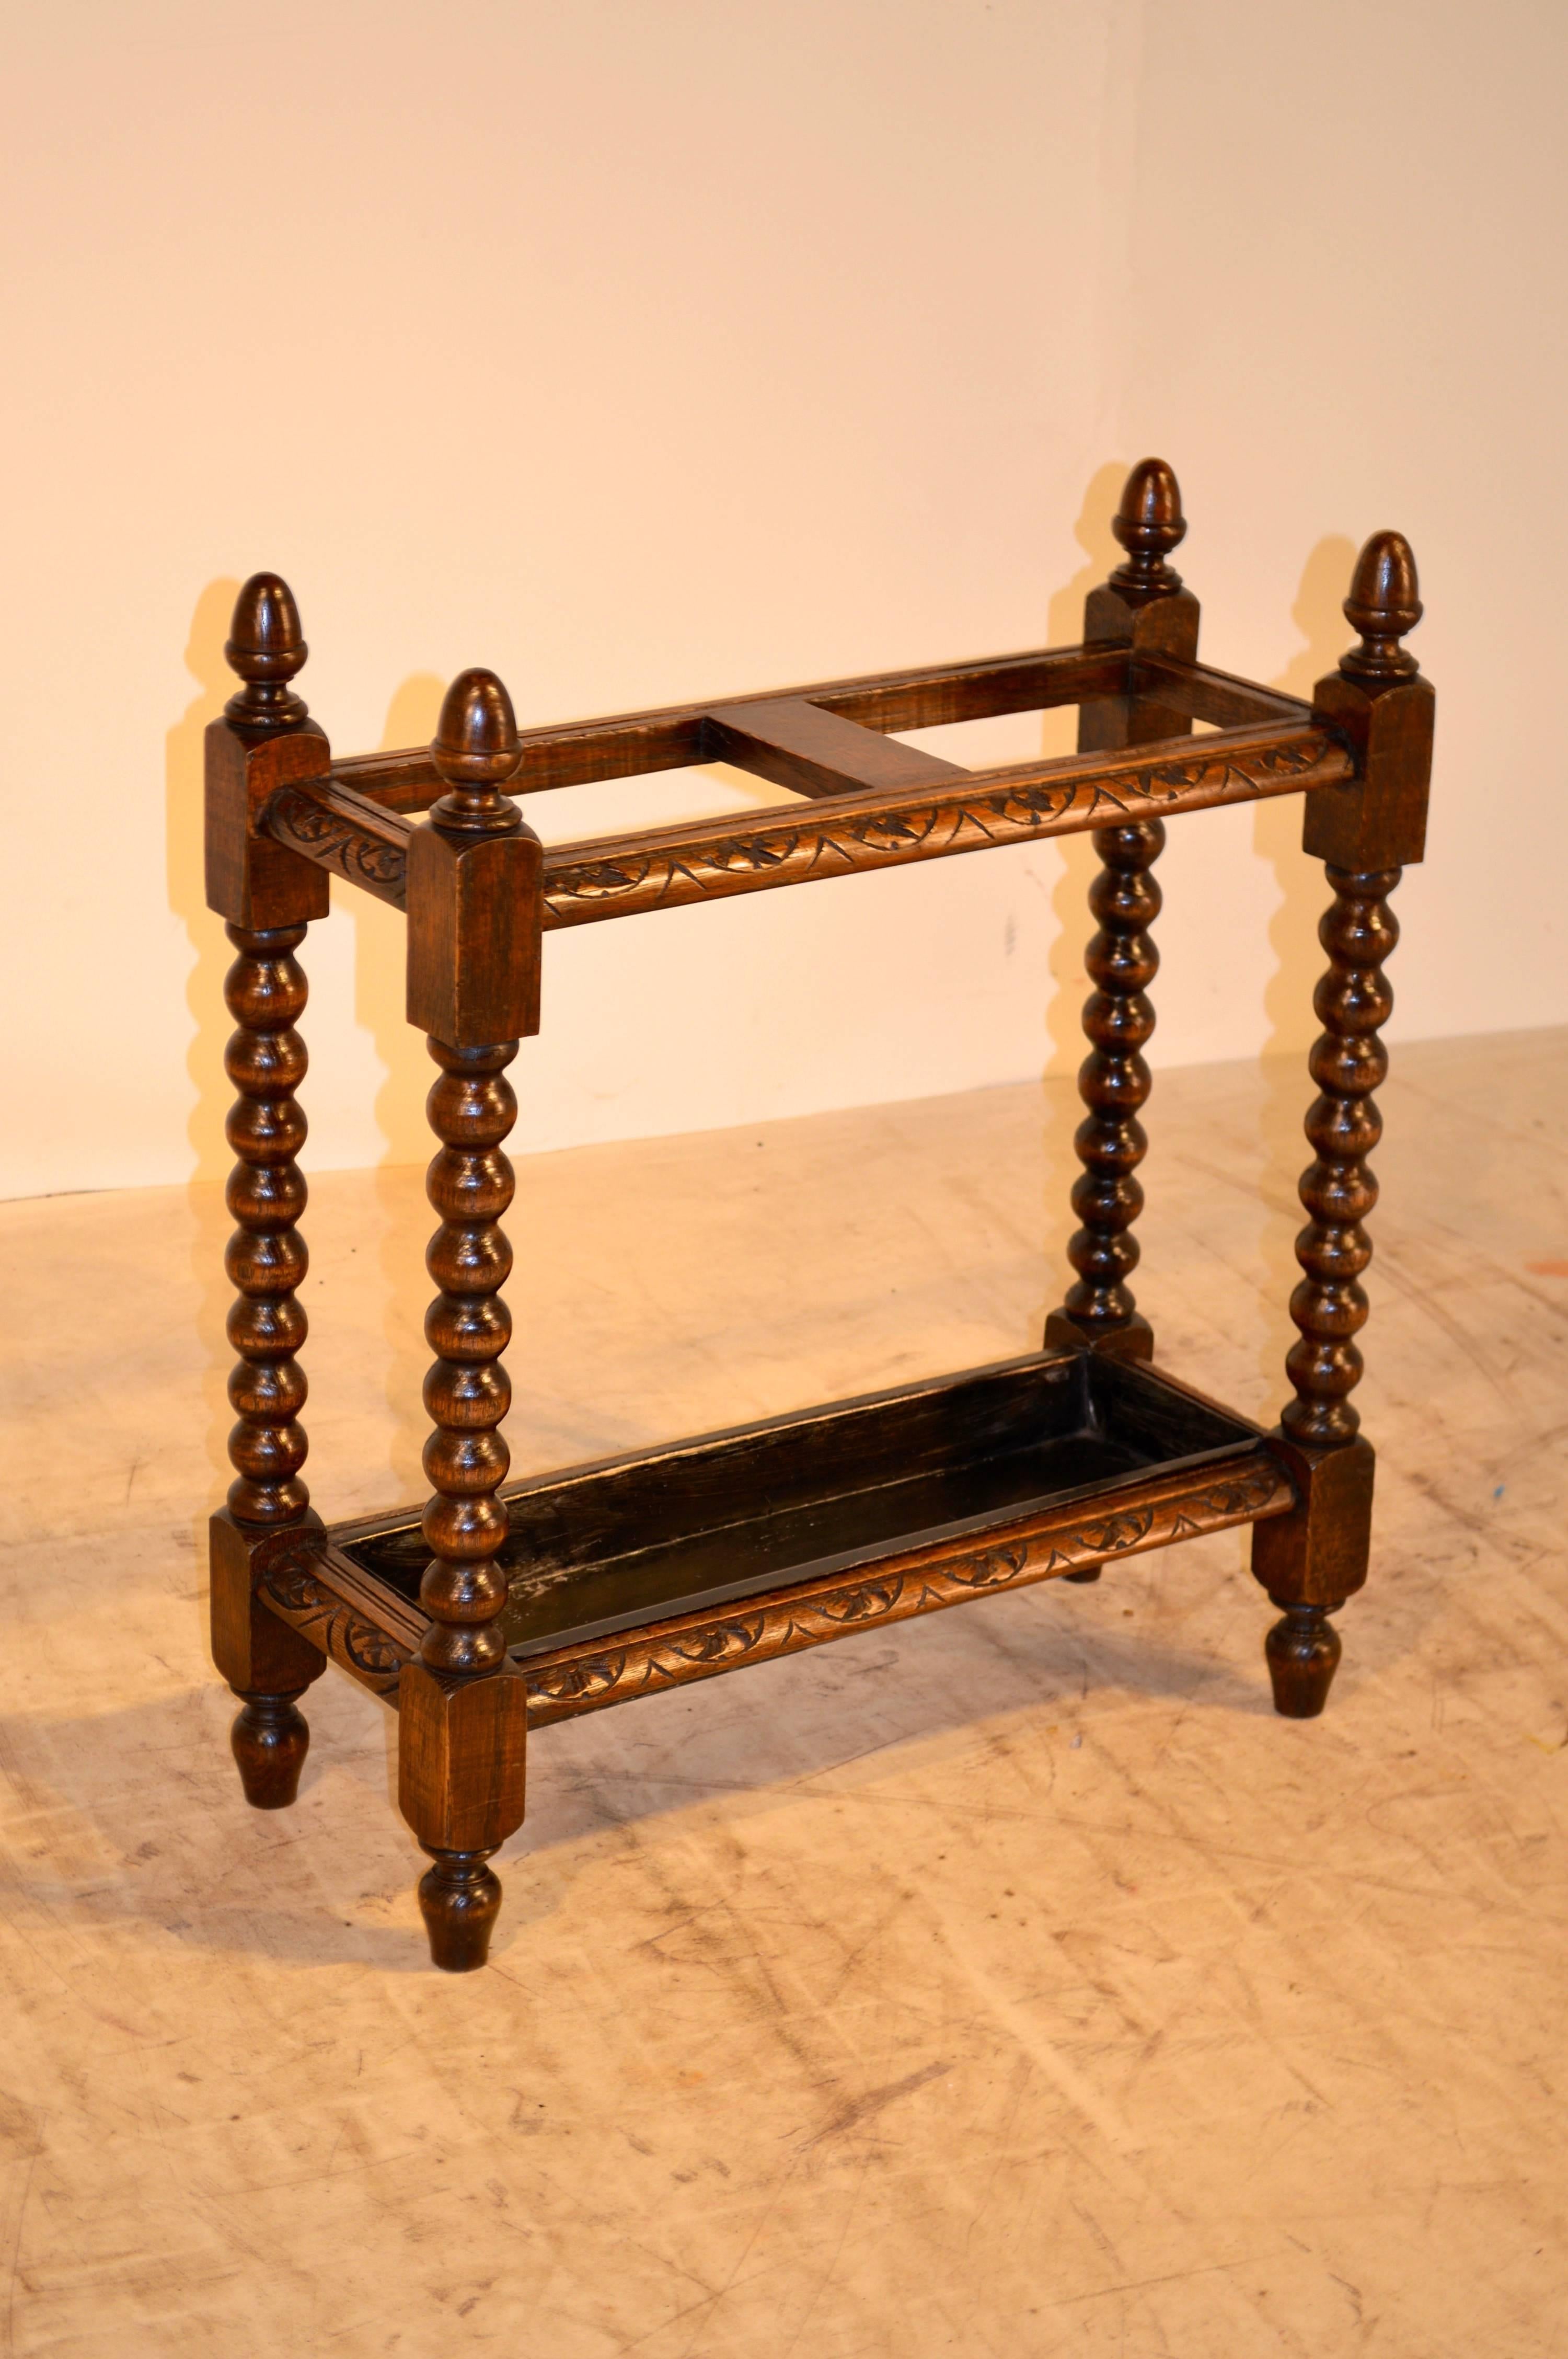 English oak umbrella stand with four acorn turned finials, carved decoration throughout, and hand-turned spool legs; circa 1880. Raised on turned feet.